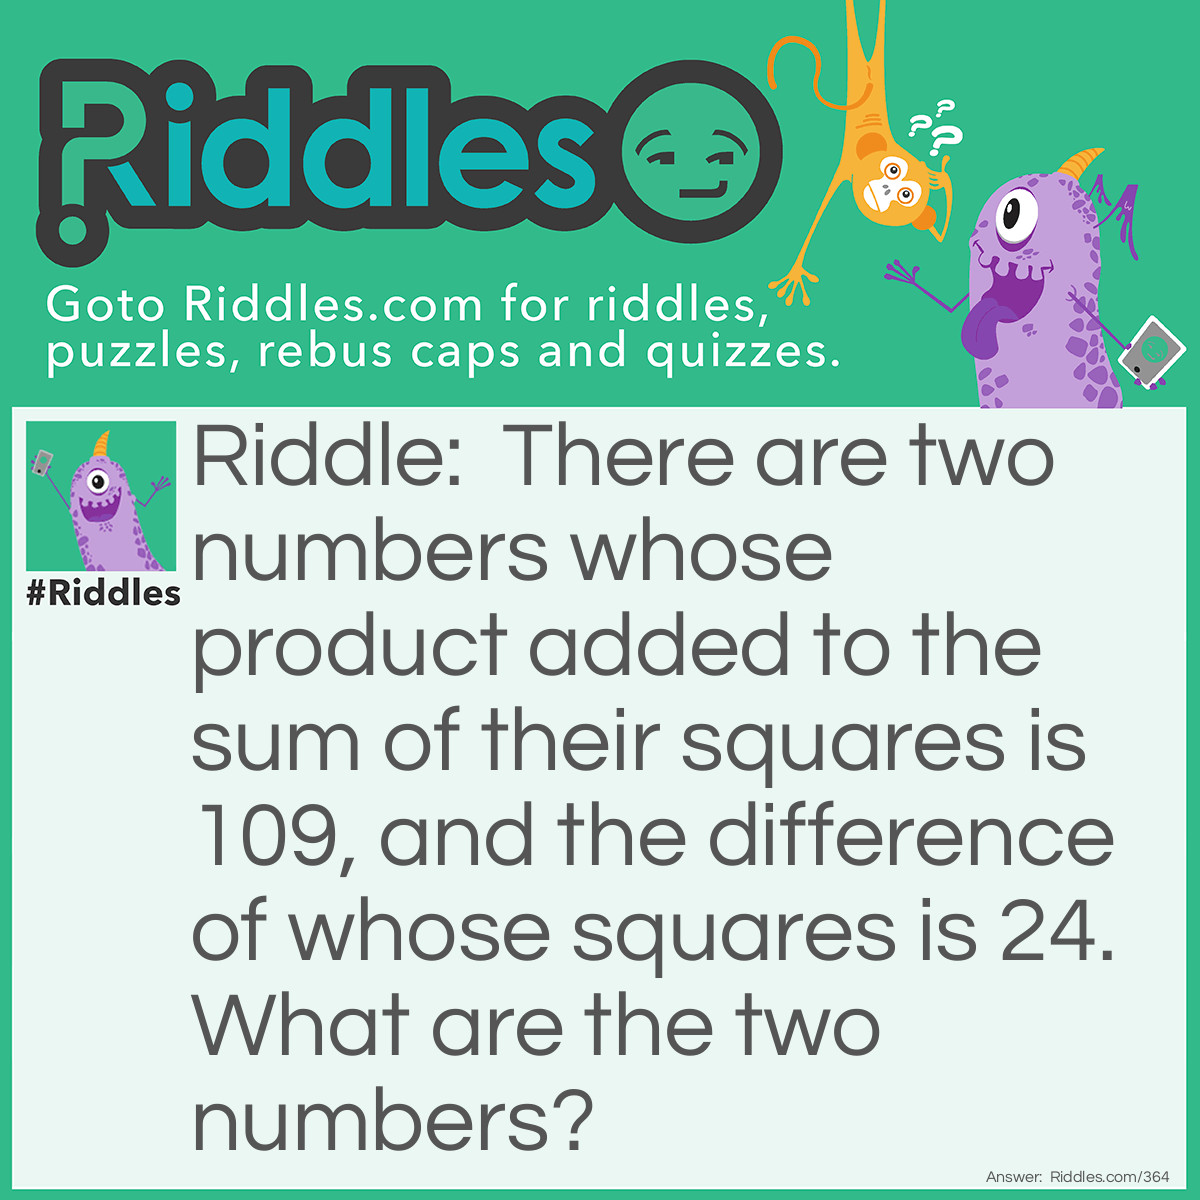 Riddle: There are two numbers whose product added to the sum of their squares is 109, and the difference of whose squares is 24. What are the two numbers? Answer: 5 and 7.
(5)² = 25(7)² = 49(5x7)+25+49=10949-25=24